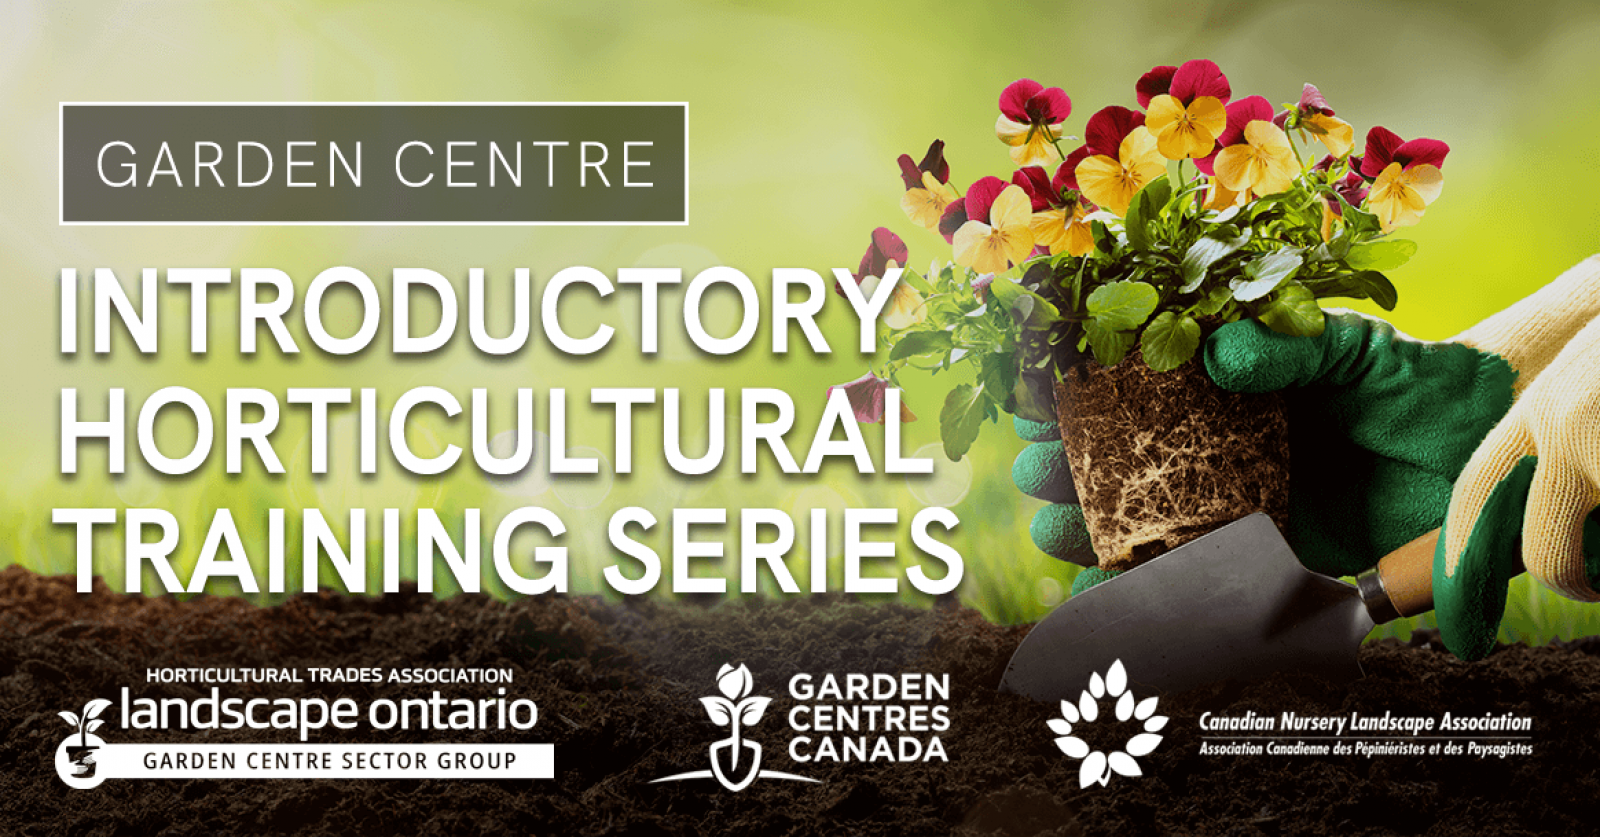 Introductory Horticultural Training Series